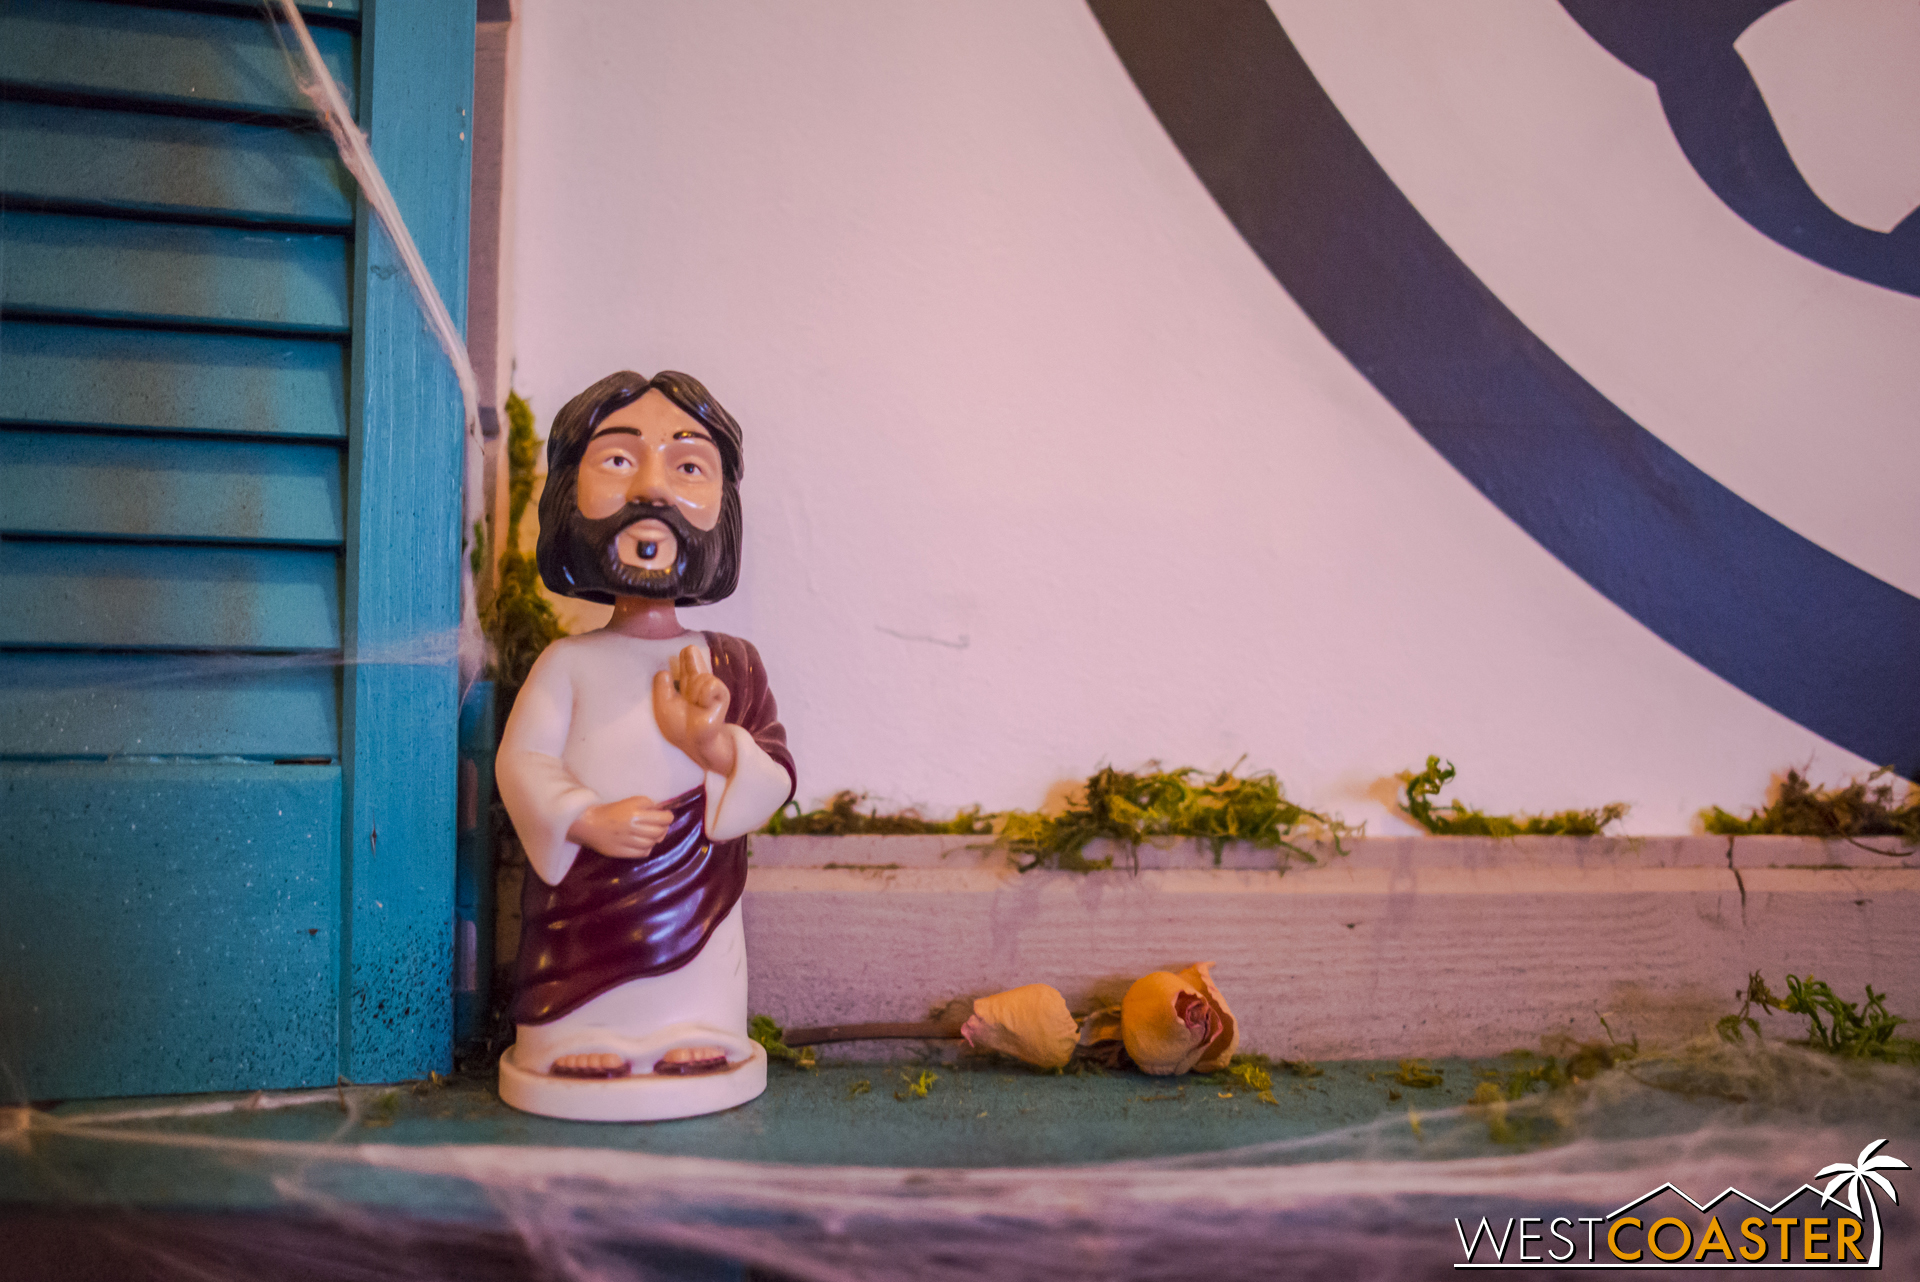  The maze dumped guests into a bar and lounge area, apparently watched by this Bobblehead Jesus. 